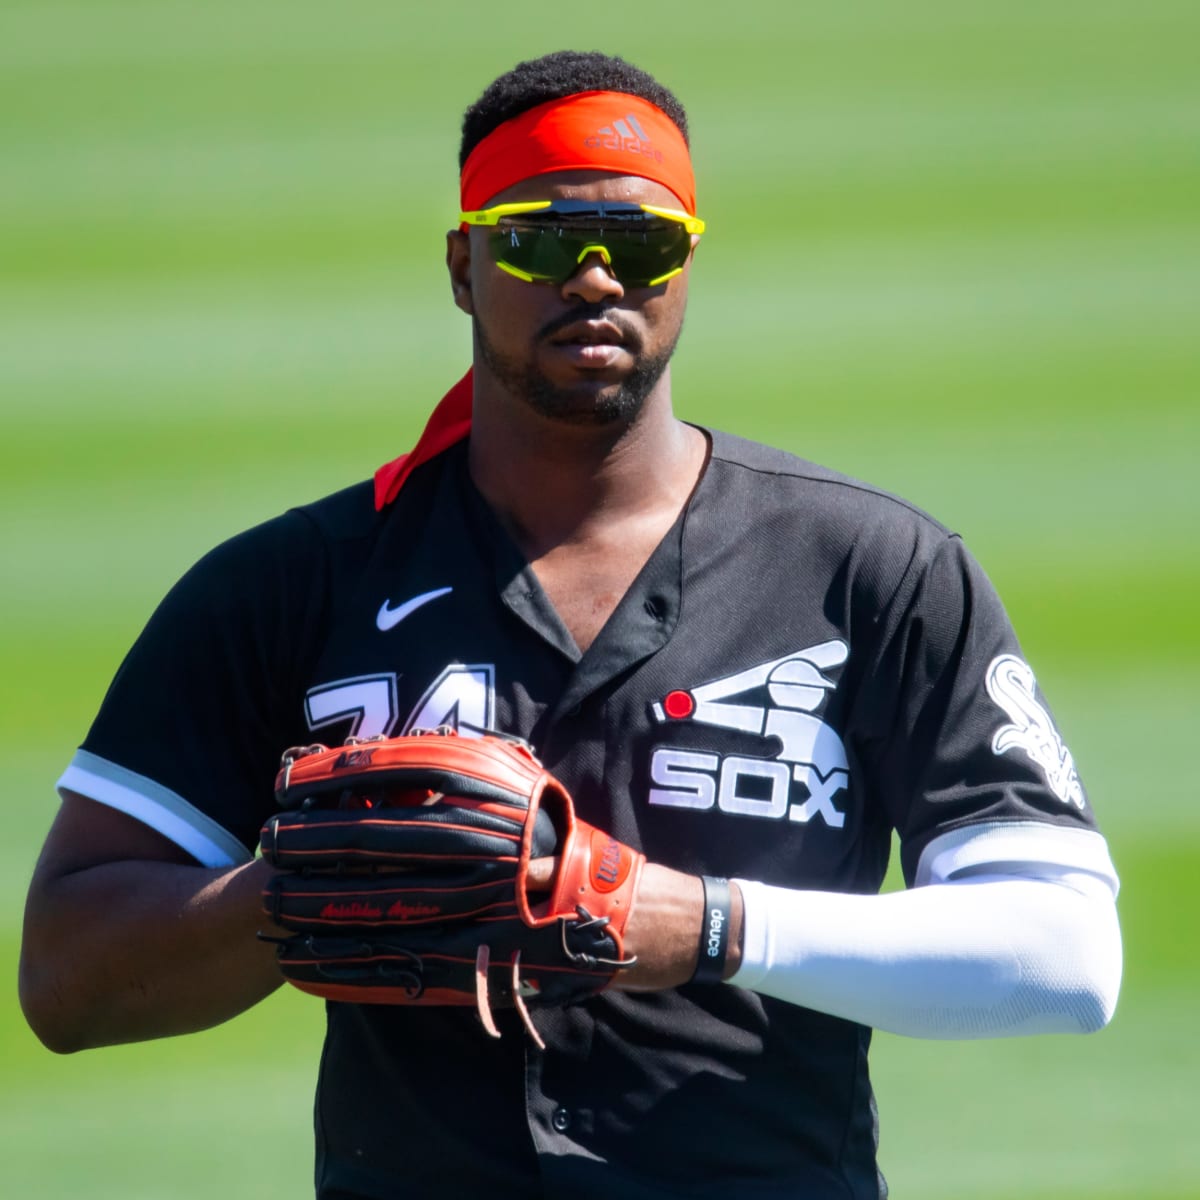 Eloy Jimenez expected to miss 4-5 days with lower left leg injury